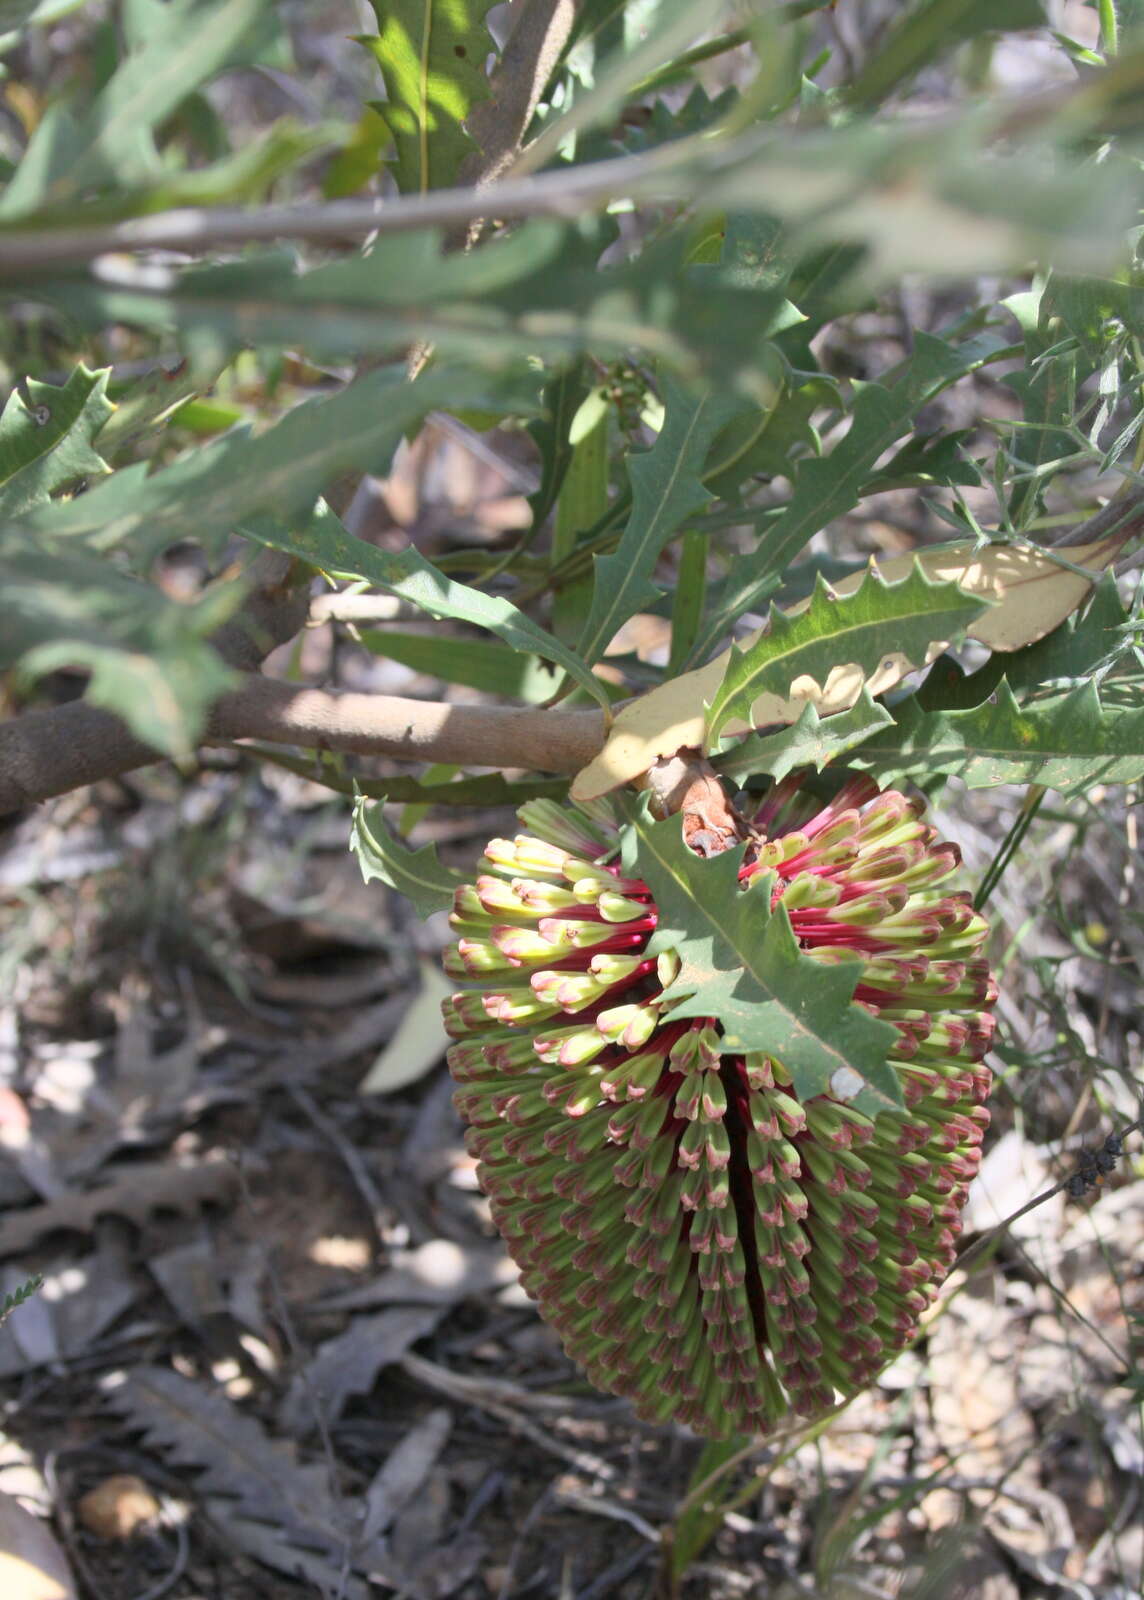 Image of Prickly Banksia